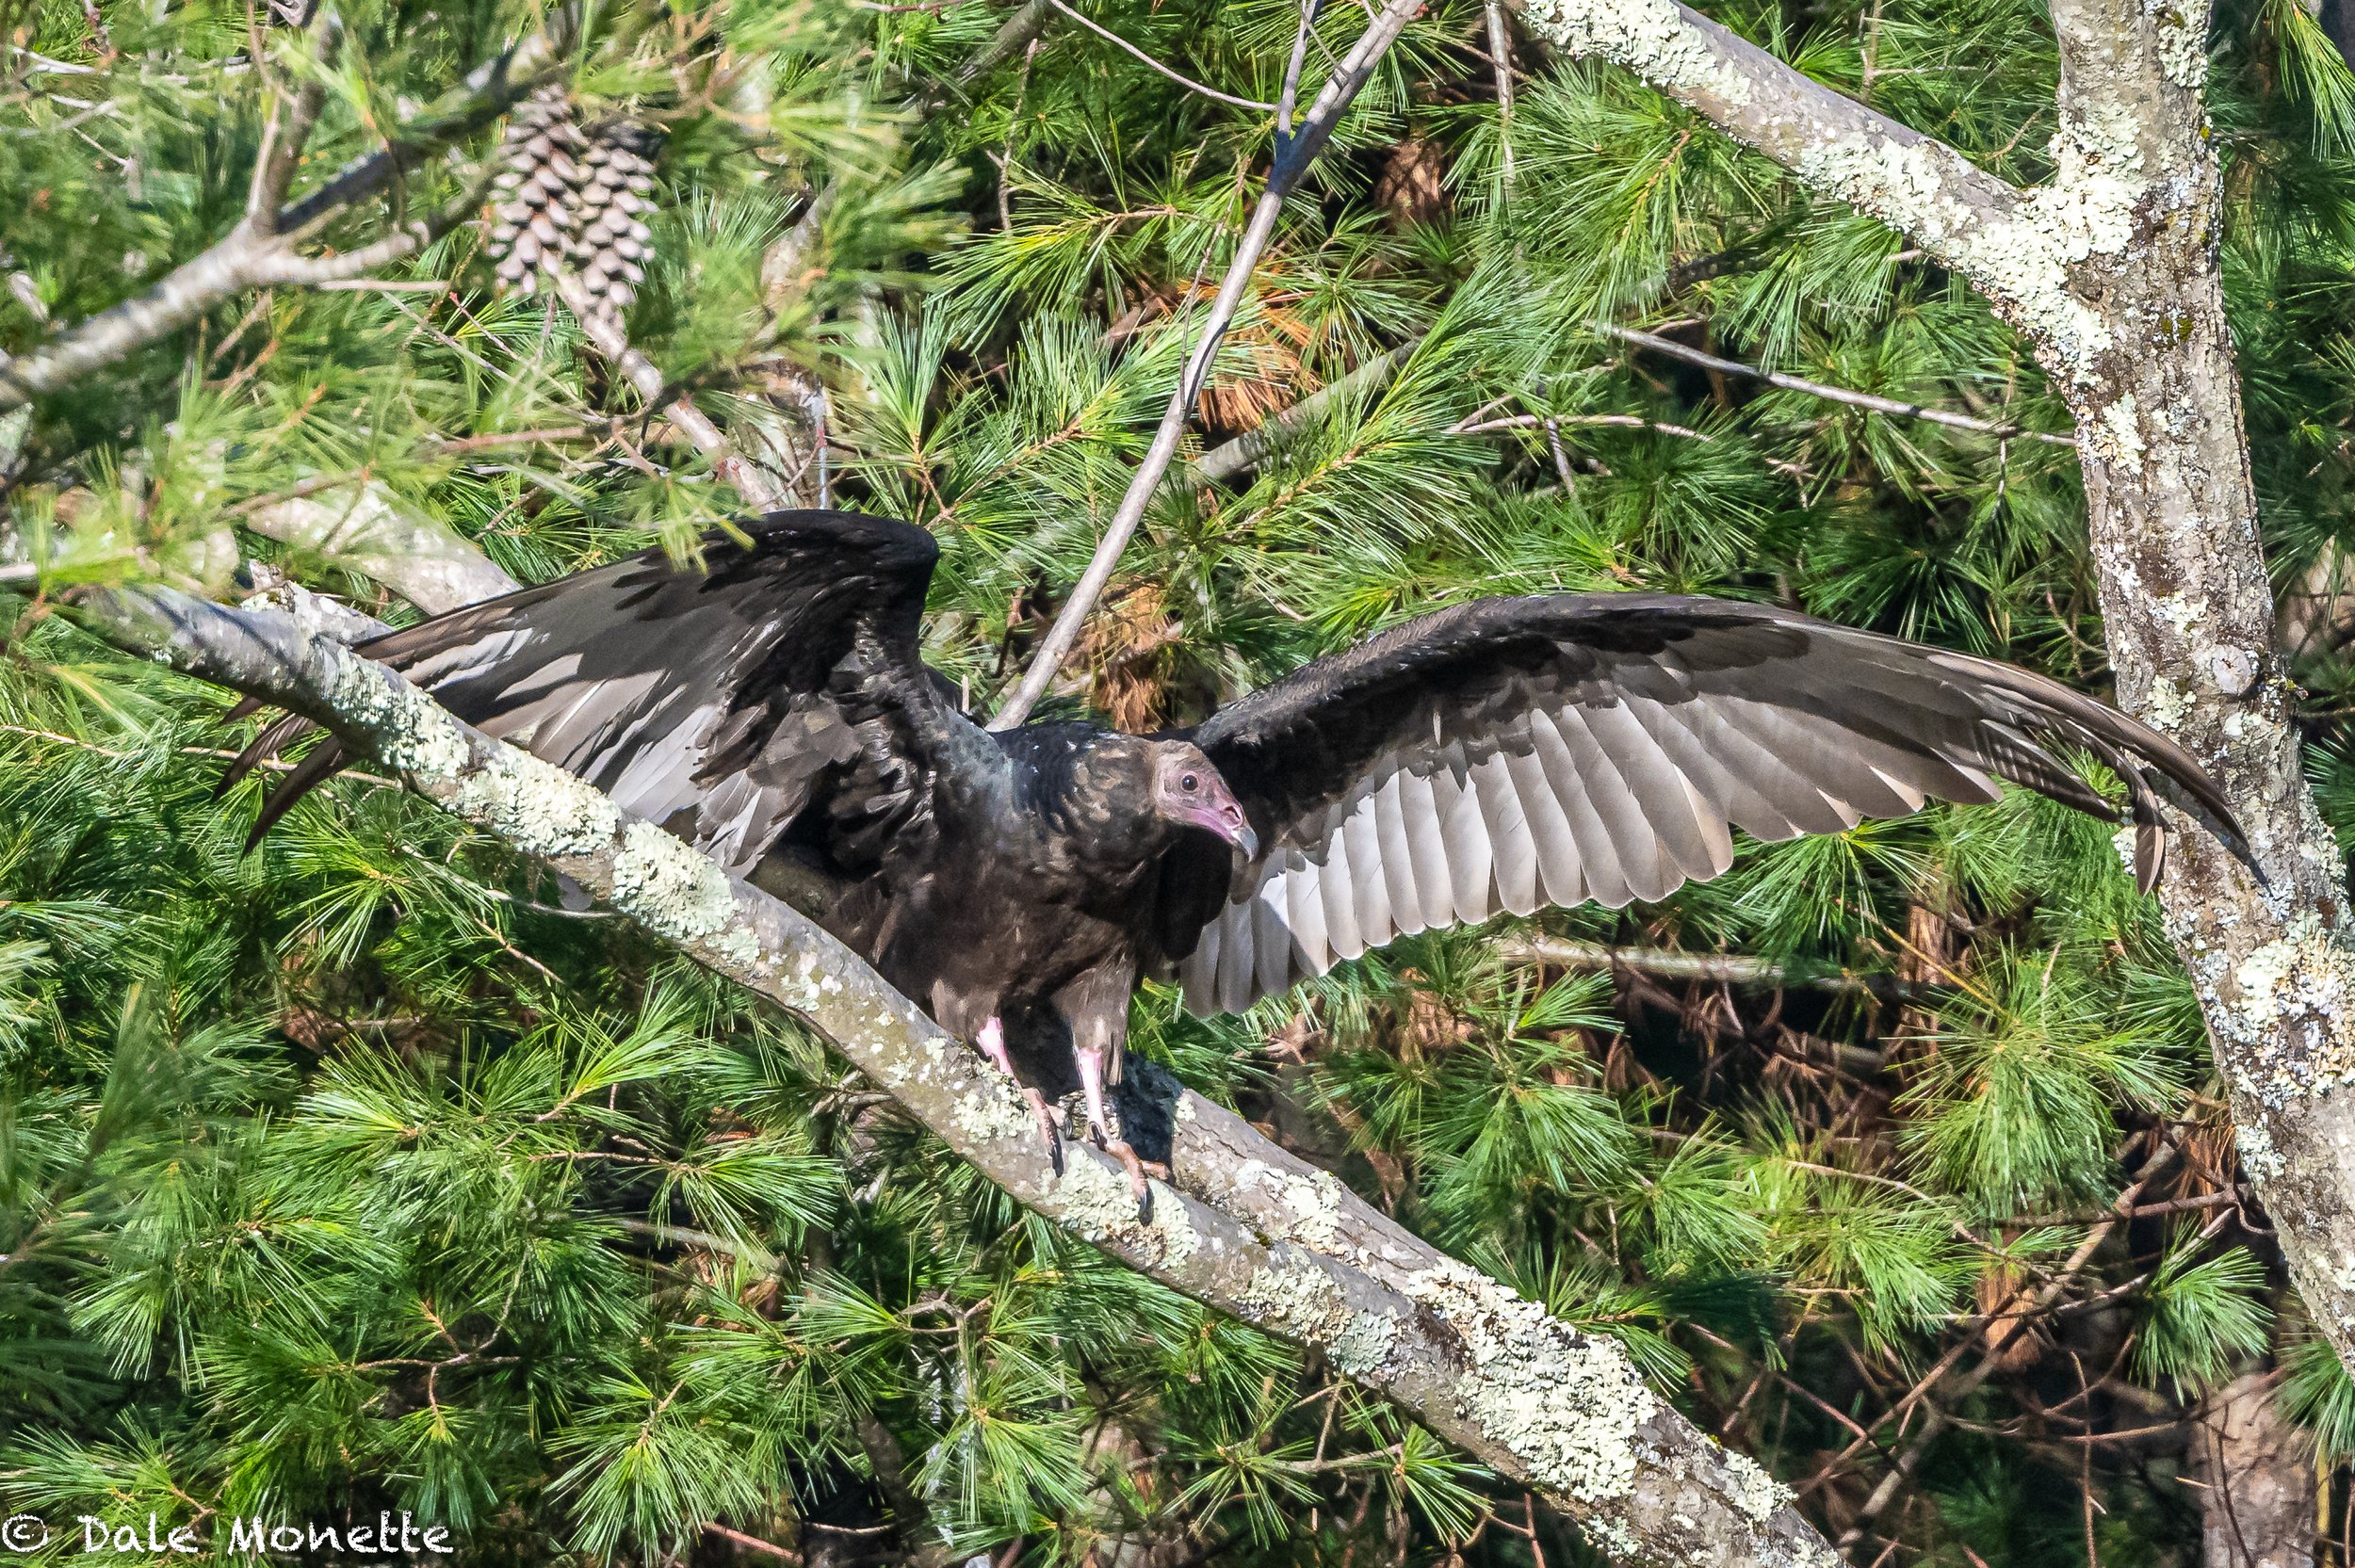   This turkey vulture flew out of a tree I was standing under and landed about 60 yards away. They open their wings to gather heat from the sun on cold mornings.  